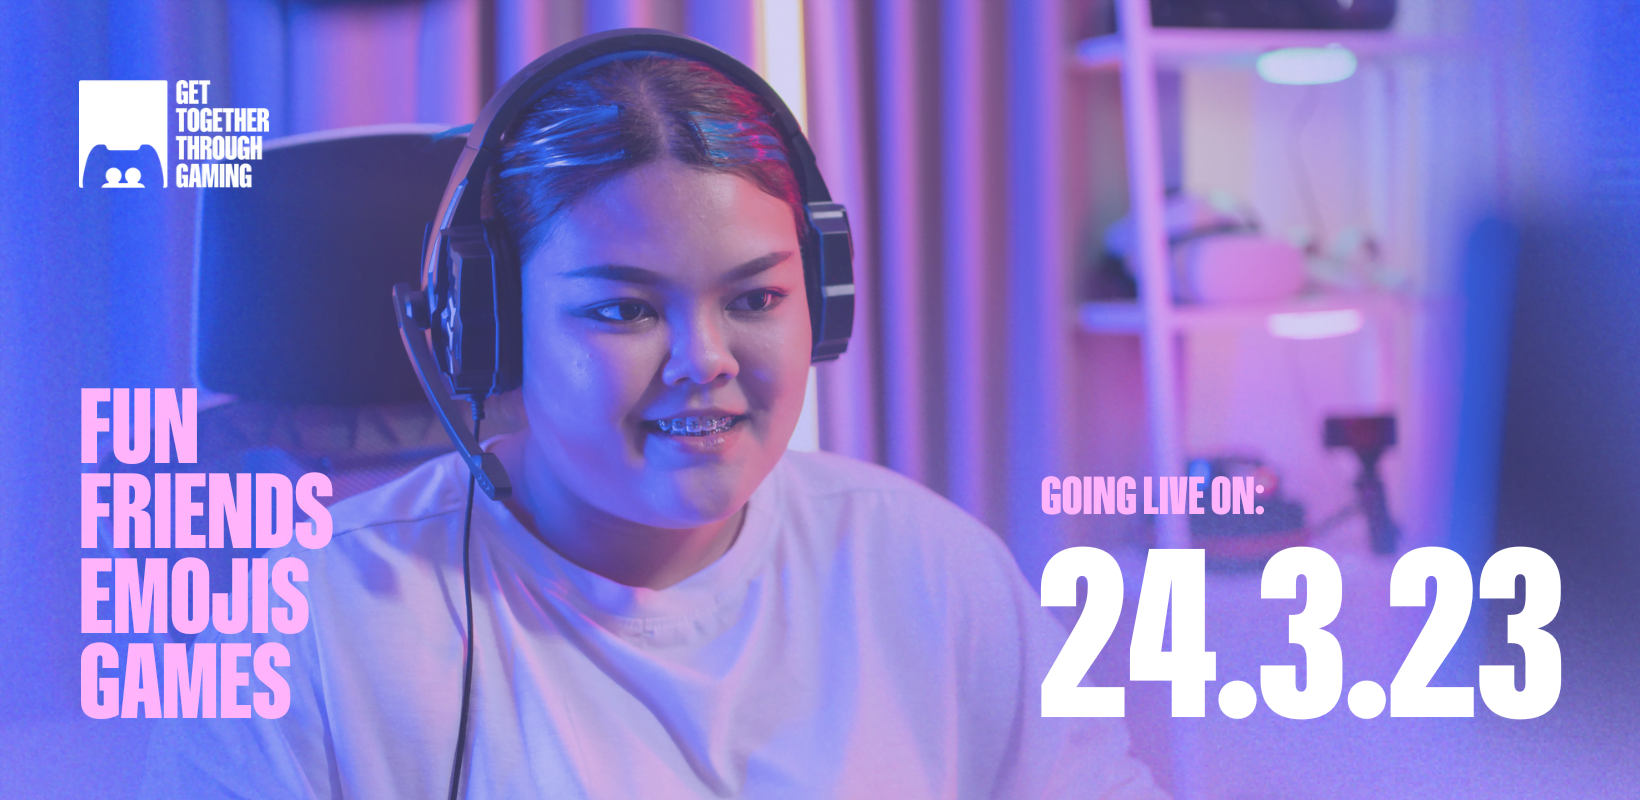 A young person is gaming with a headset on. The text reads: "Get Together Through Gaming. Fun, friends, emojis, games. Going live on: 24.03.23."